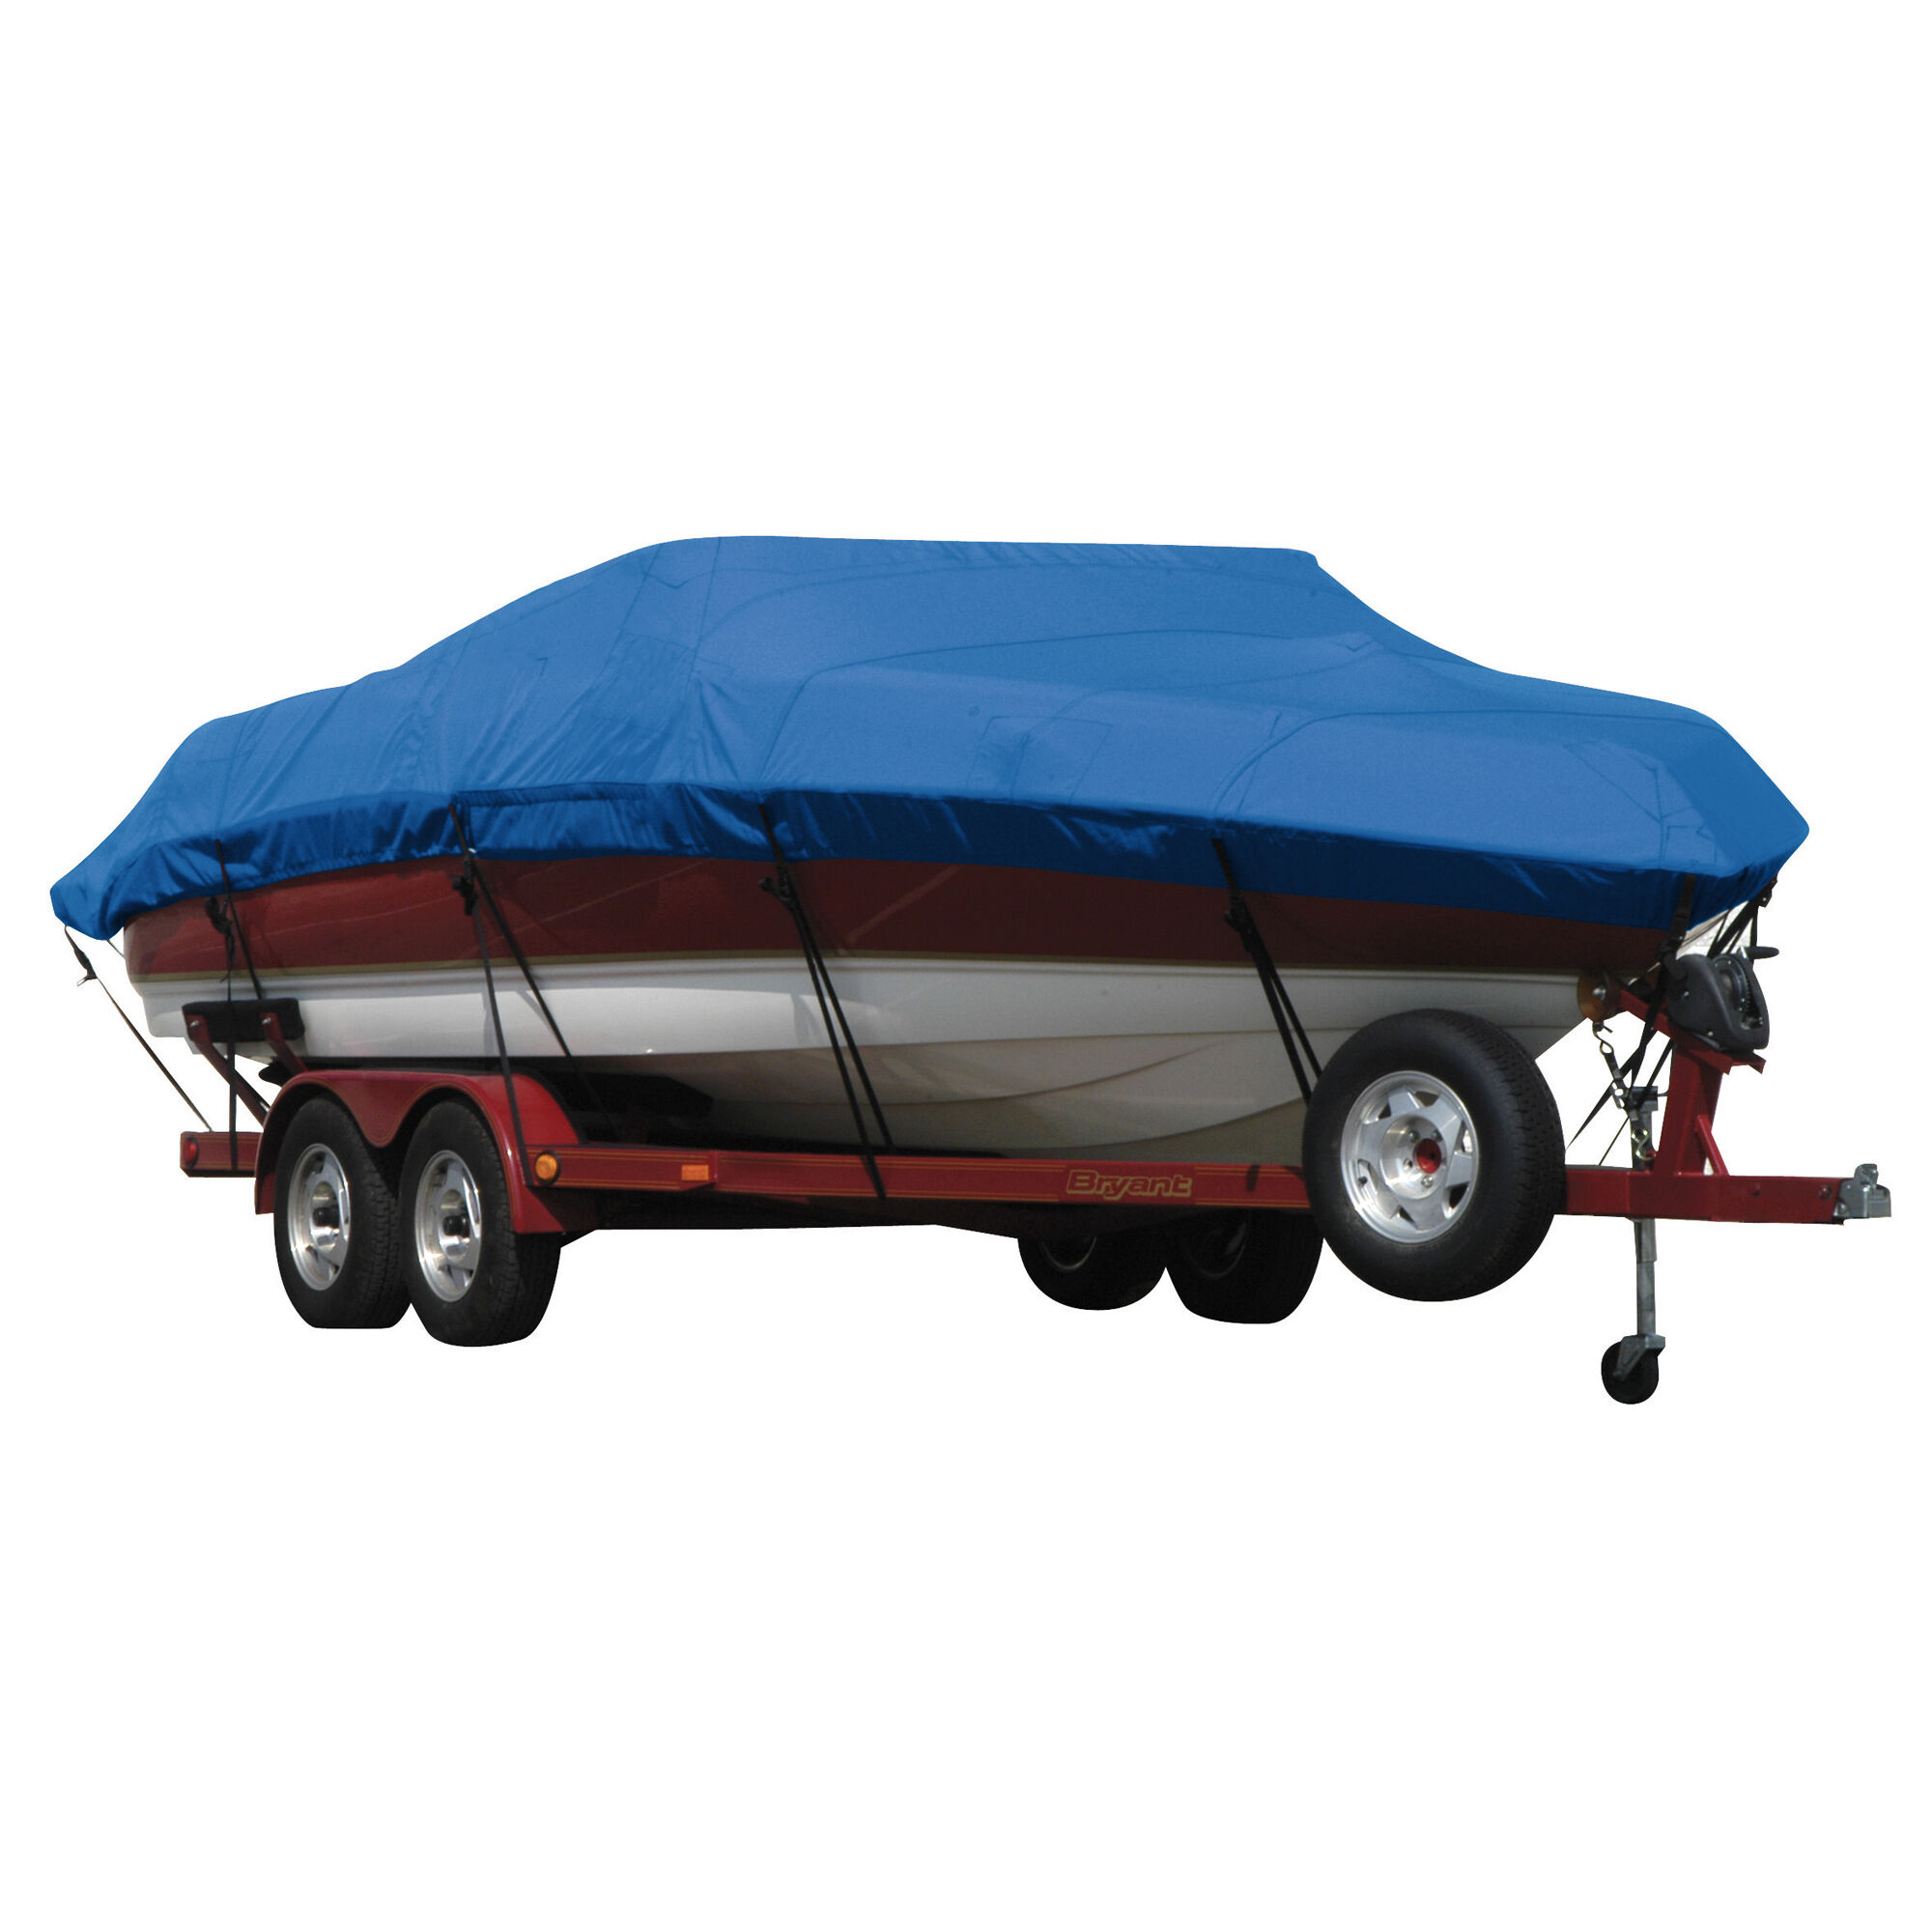 Covermate Exact Fit Sunbrella Boat Cover for Campion Chase 910 Zri Chase 910 Zri Cc I/O. Pacific Blue